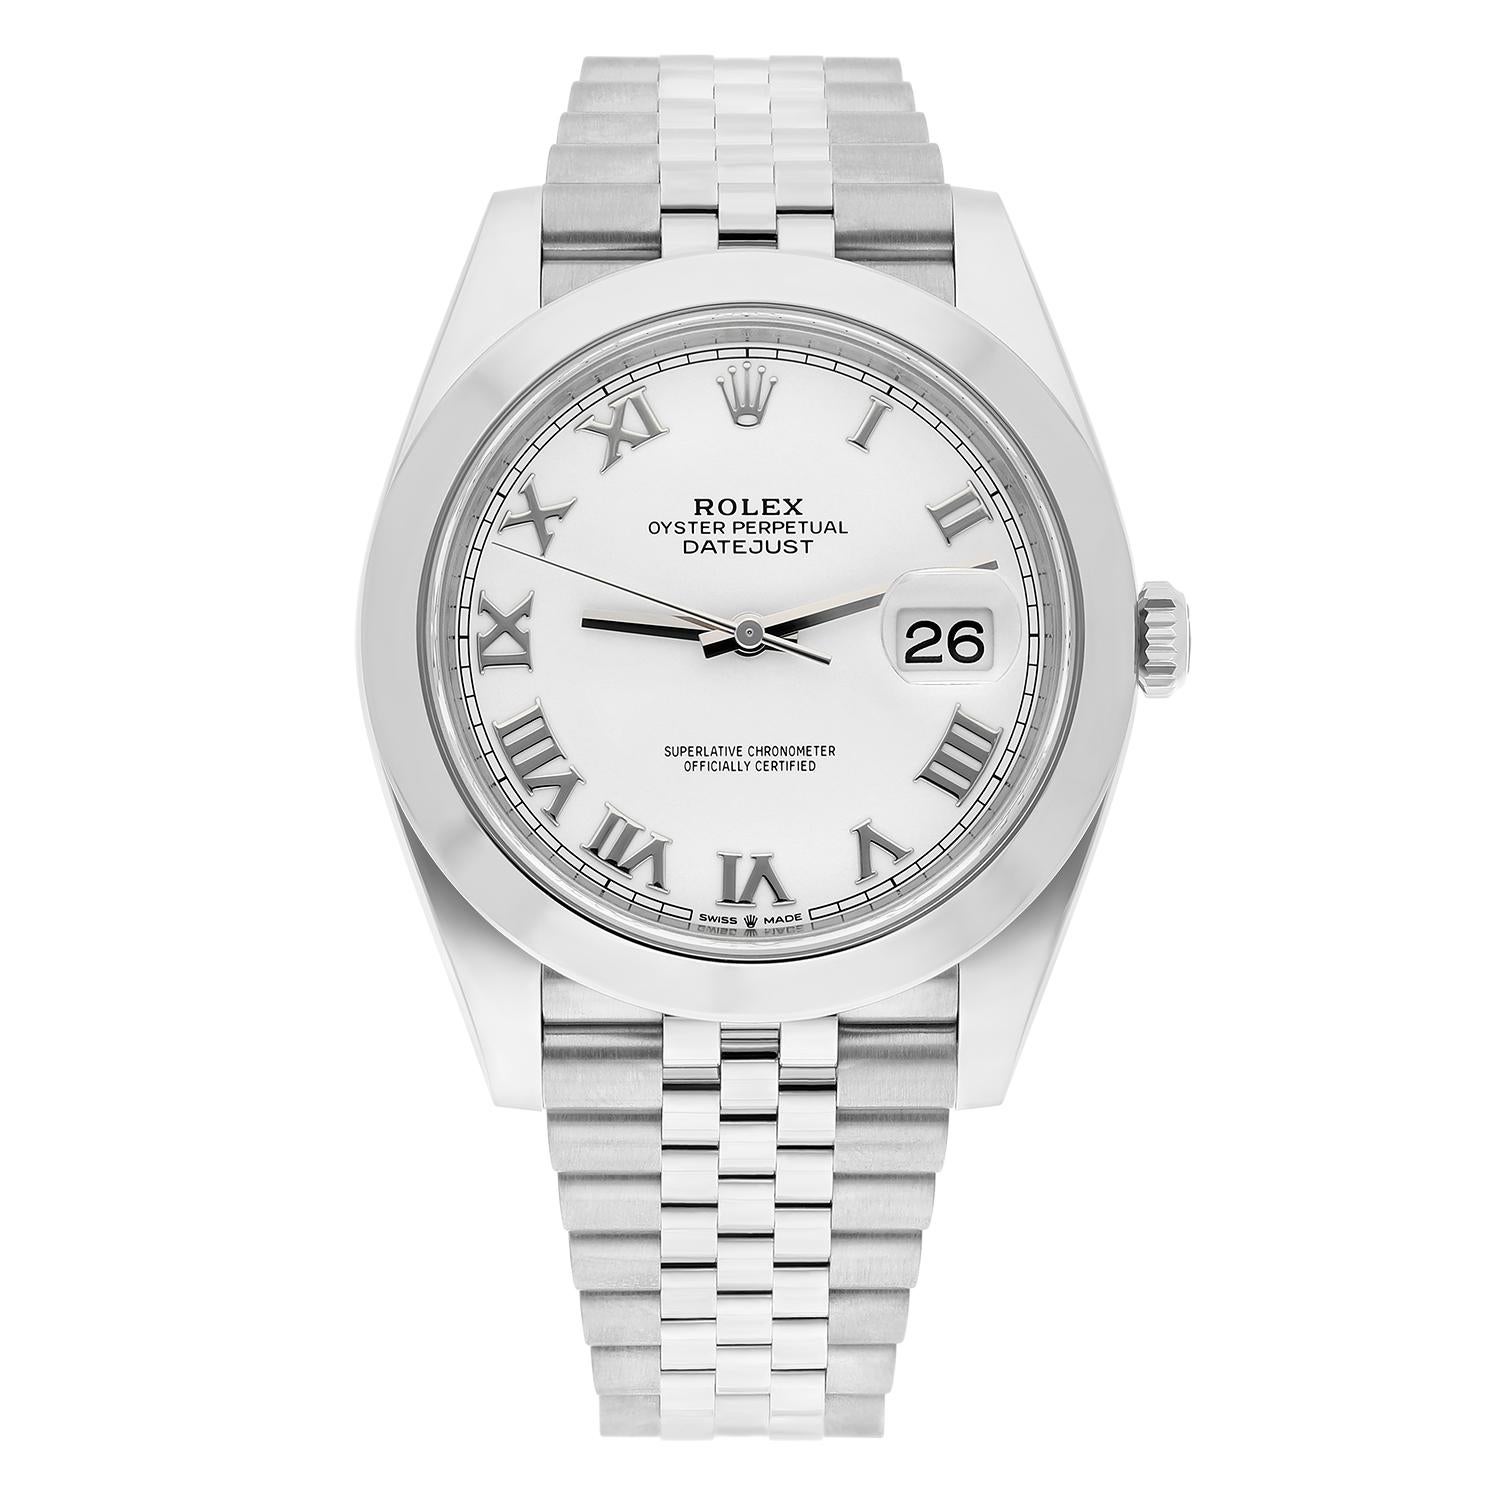 41mm 904L stainless steel case, screw-down steel back, screw-down crown with twinlock double waterproofness system, smooth bezel, scratch-resistant double anti-reflective sapphire crystal with cyclops lens over the date, white dial, Roman numerals,